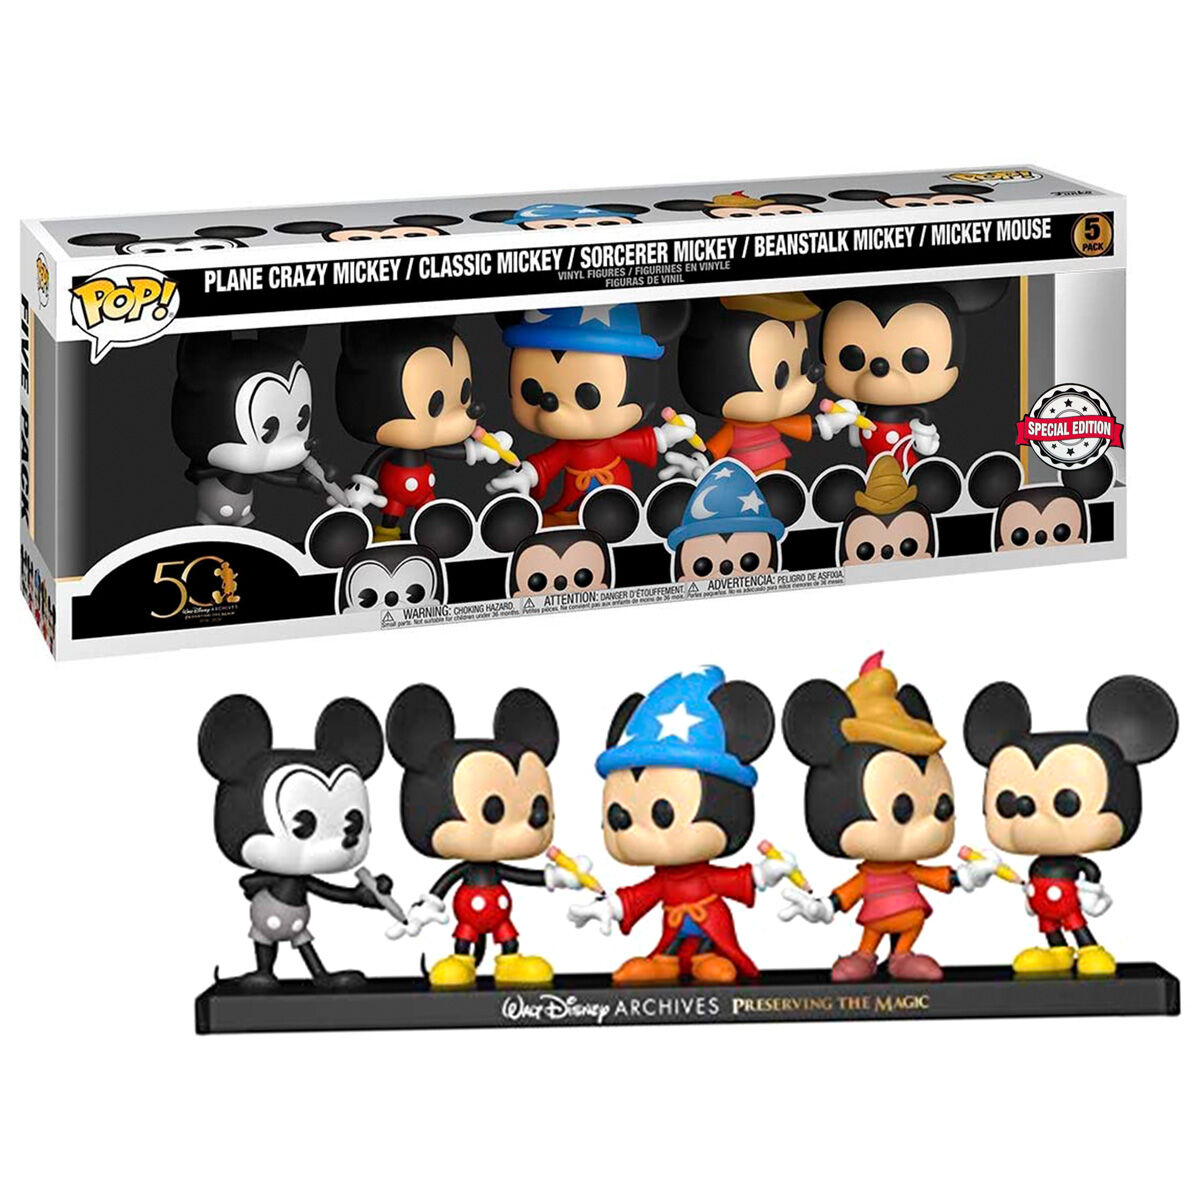 Pack 5 figuras POP Disney Archives Mickey Exclusive 889698511186